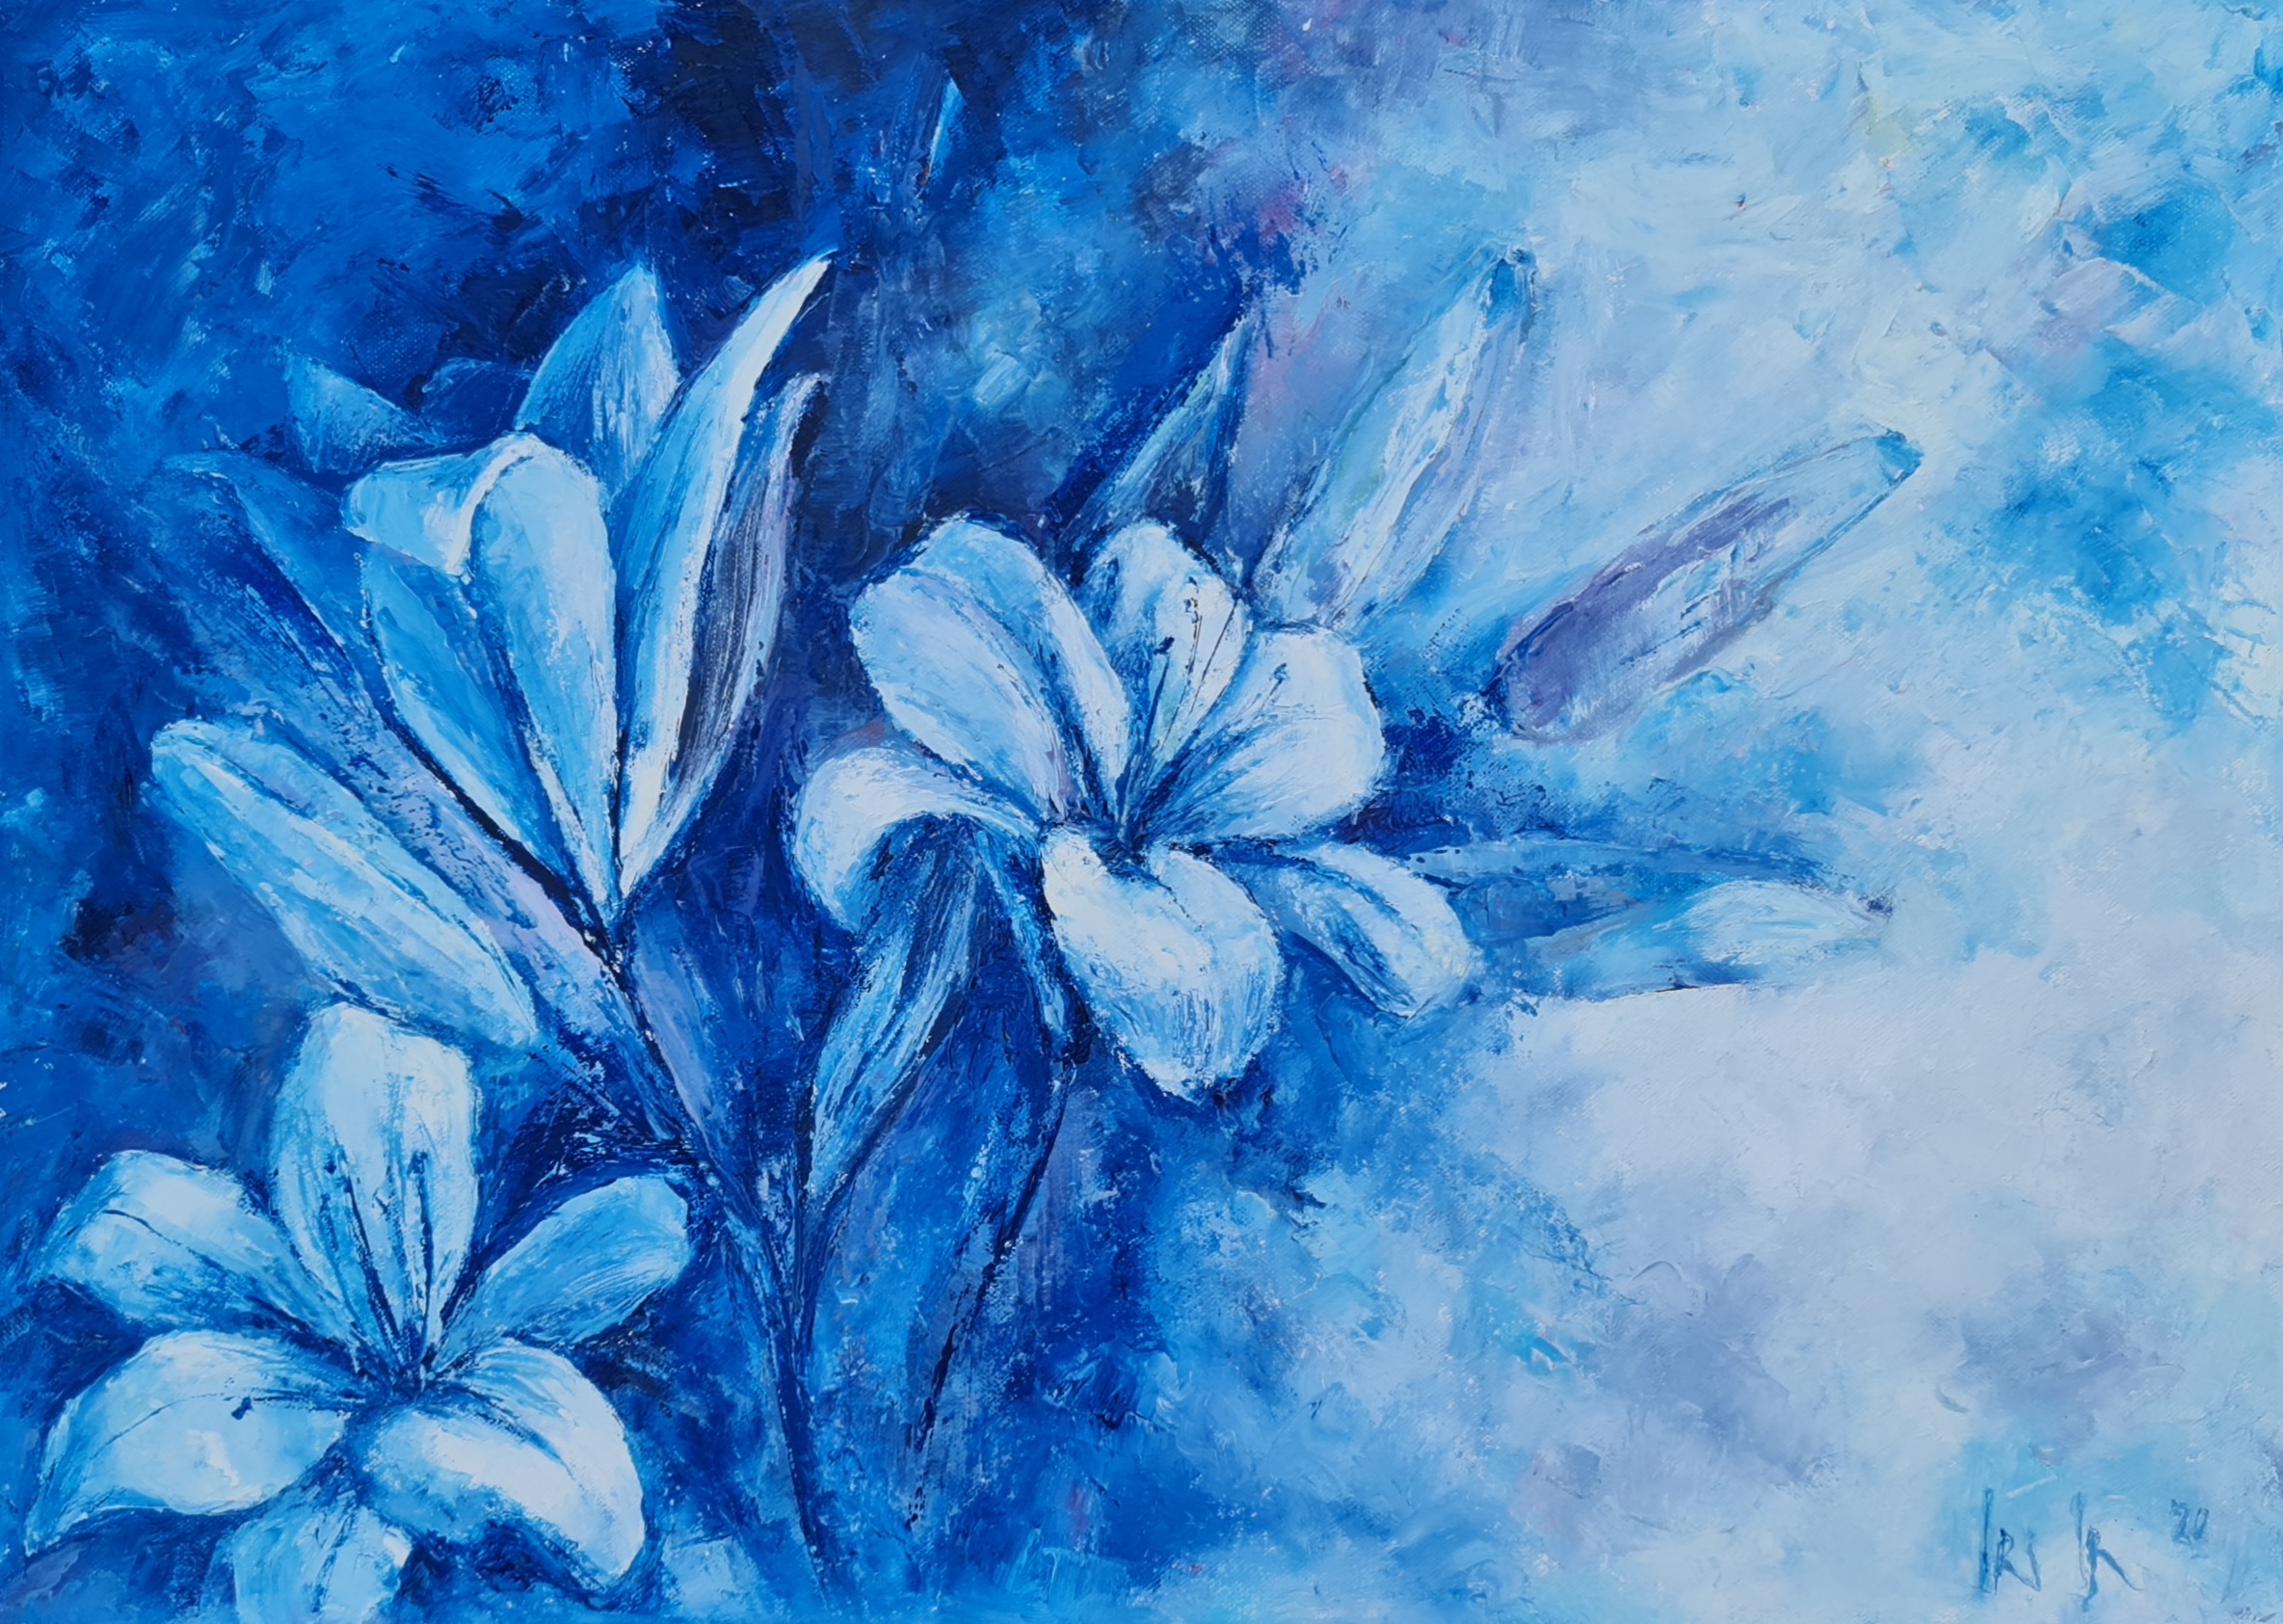 DANCING in a BLUE NIGHT Lilies original art painting textured flowers gift interior home wall decor natural lover white grey medium size irina taneva